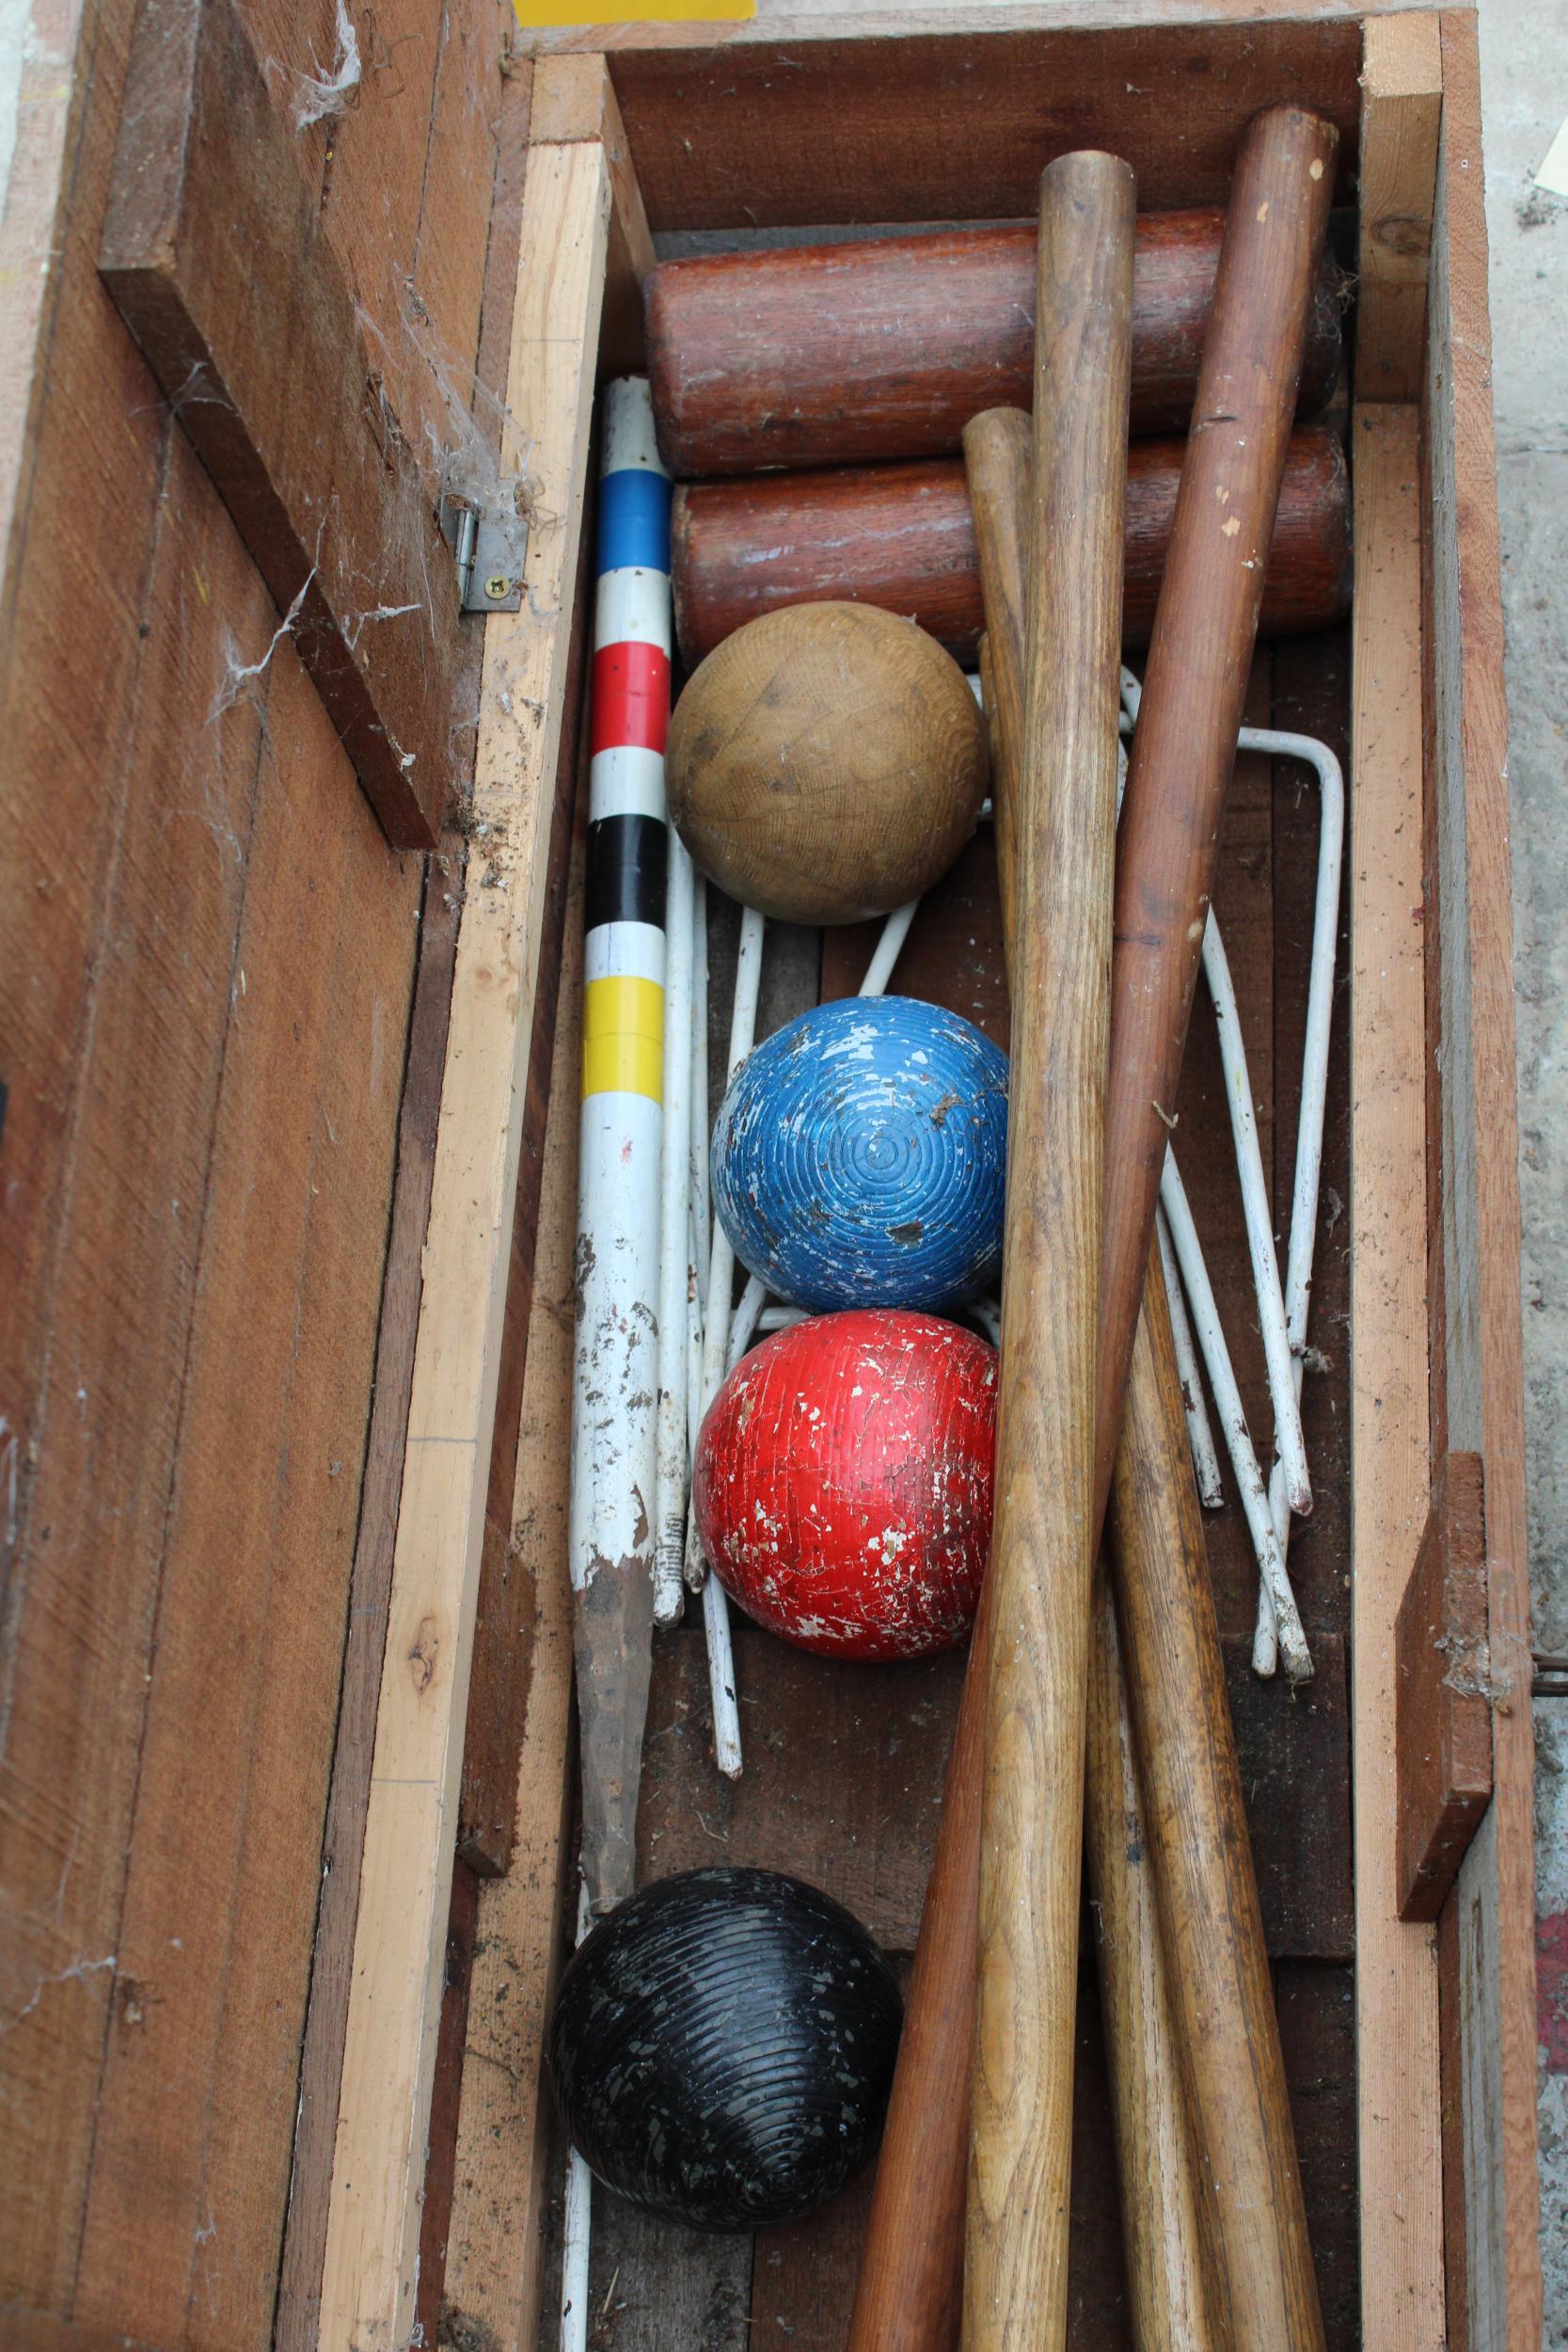 A WOODEN CROQUET SET WITH THREE JACQUES OF LONDON MALLETS - Image 2 of 4